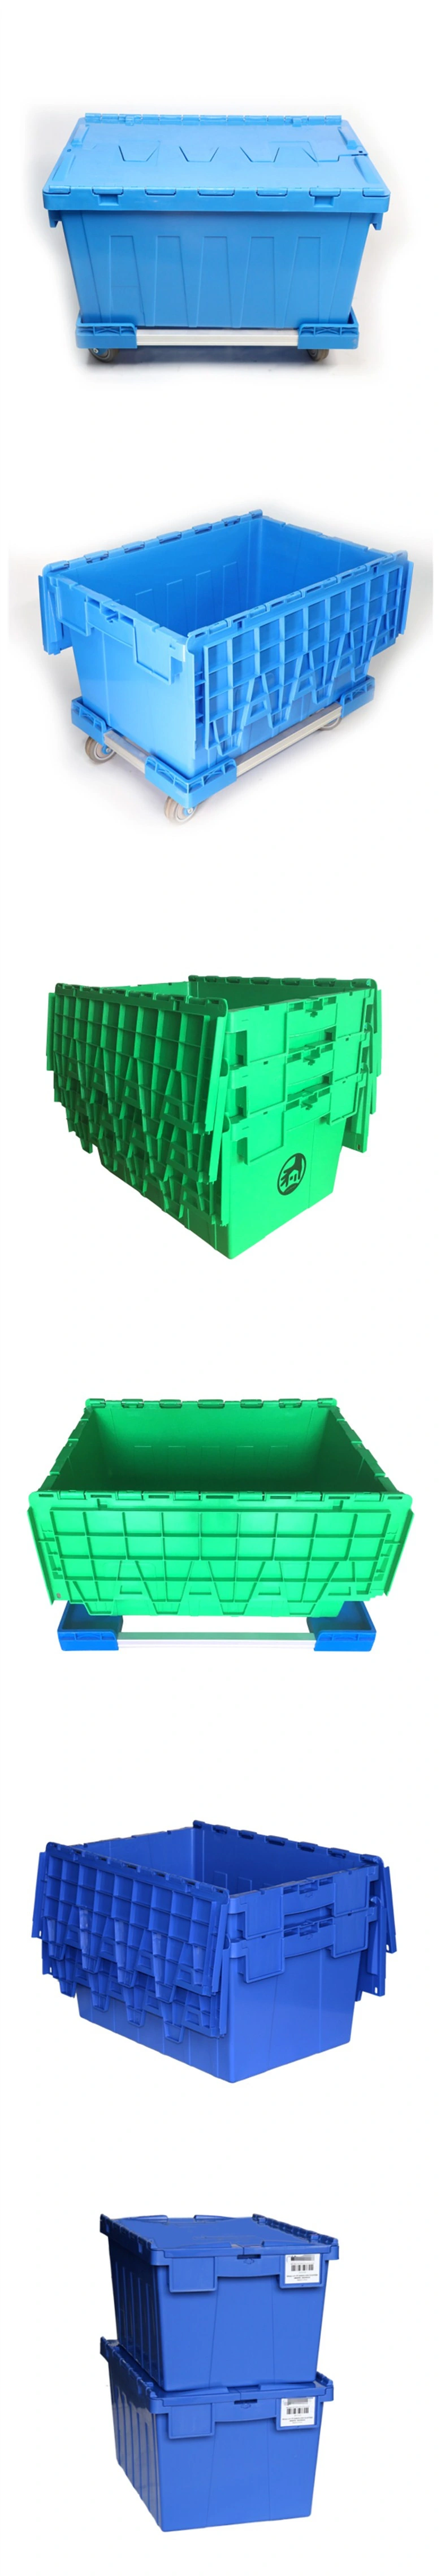 Hot Sell Factory Price Stackable and Nestable Crates Plastic with Hinged Lid